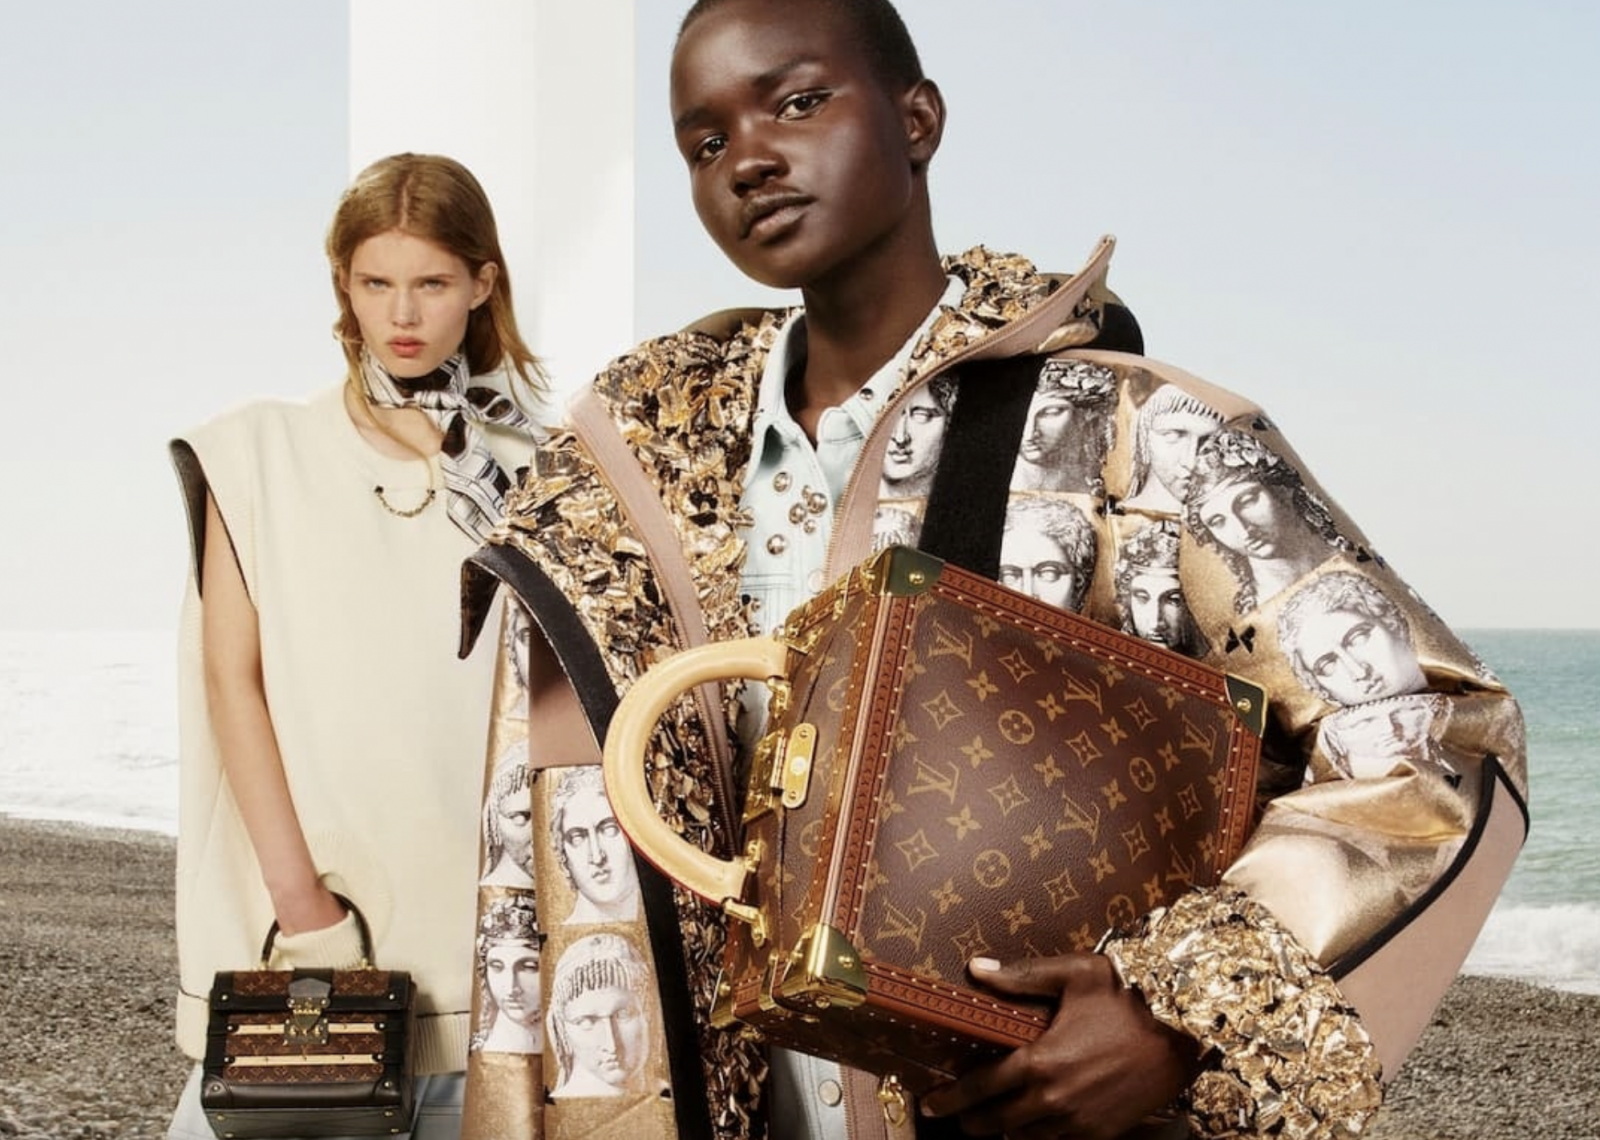 EU Trademark Body Hands Louis Vuitton a Loss in Fight Over Lookalike Mark -  The Fashion Law